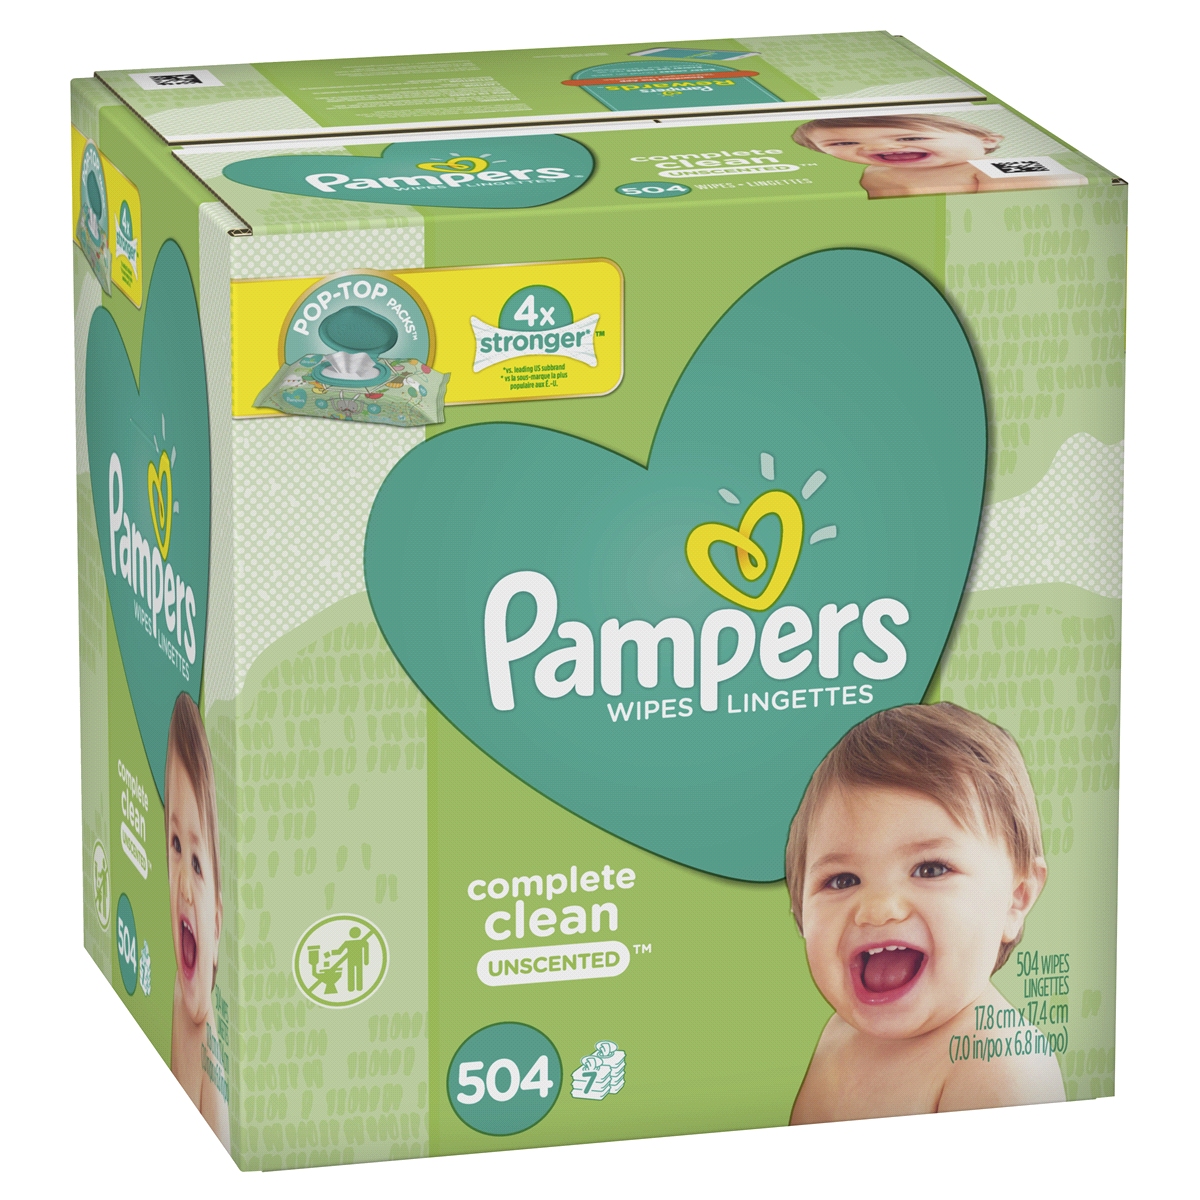 slide 2 of 5, Pampers Wipes Complete Clean, Unscented, 504 ct